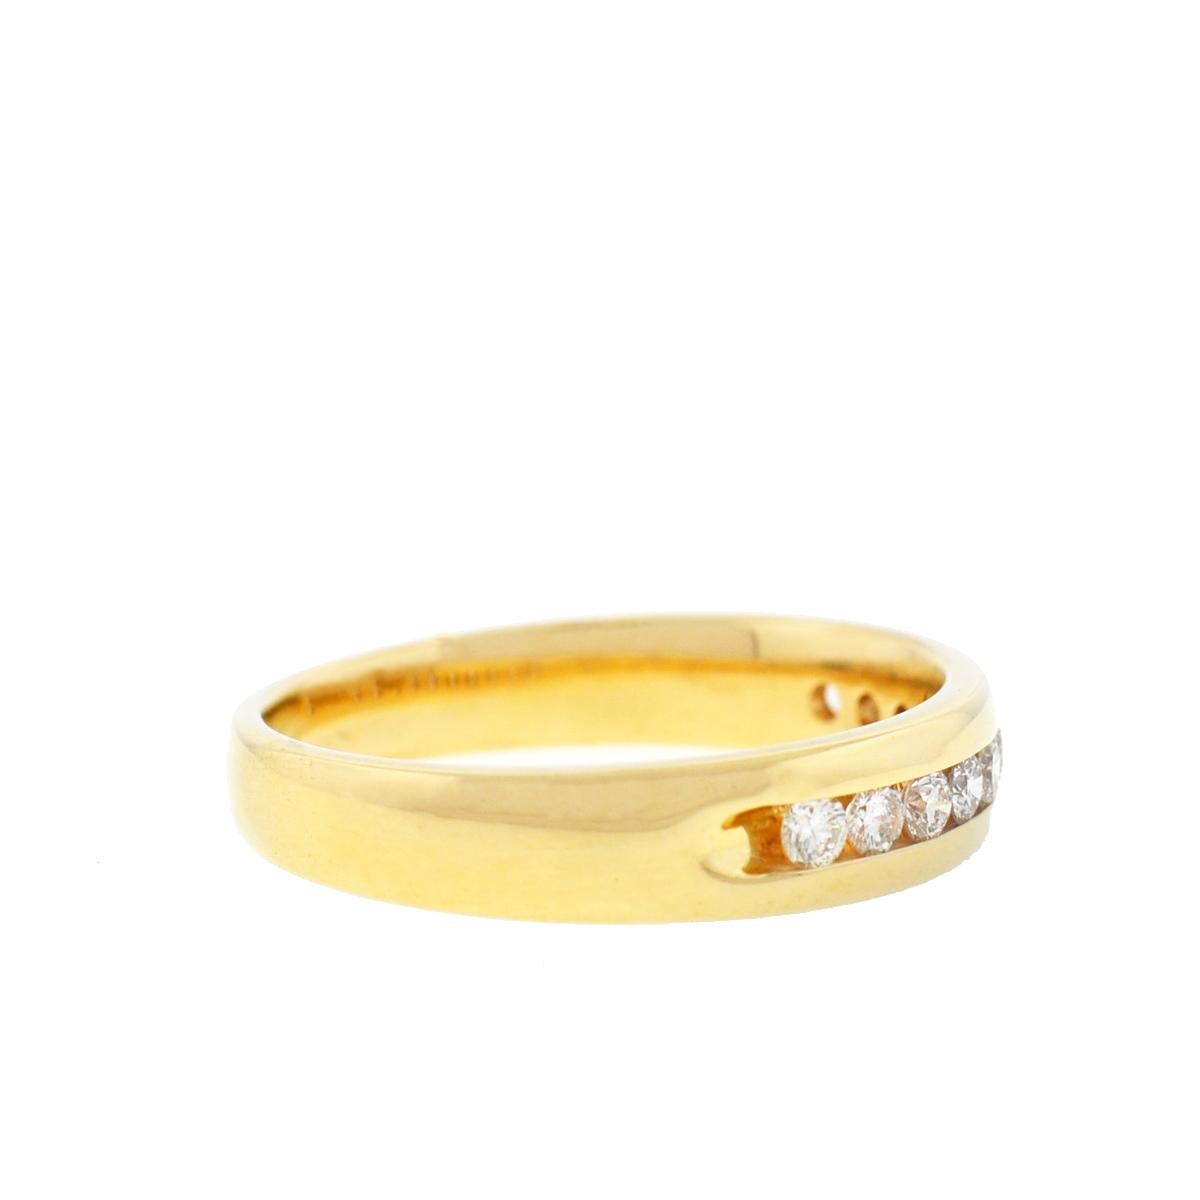 Company-N/A
Style-Gold Diamond Wedding Band .25 Cts
Metal-14k Yellow Gold 
Size-10.75
Weight -5.27 grams
Stones-Diamonds  - .25 cts tw Approx
Sku-8958-1TEE